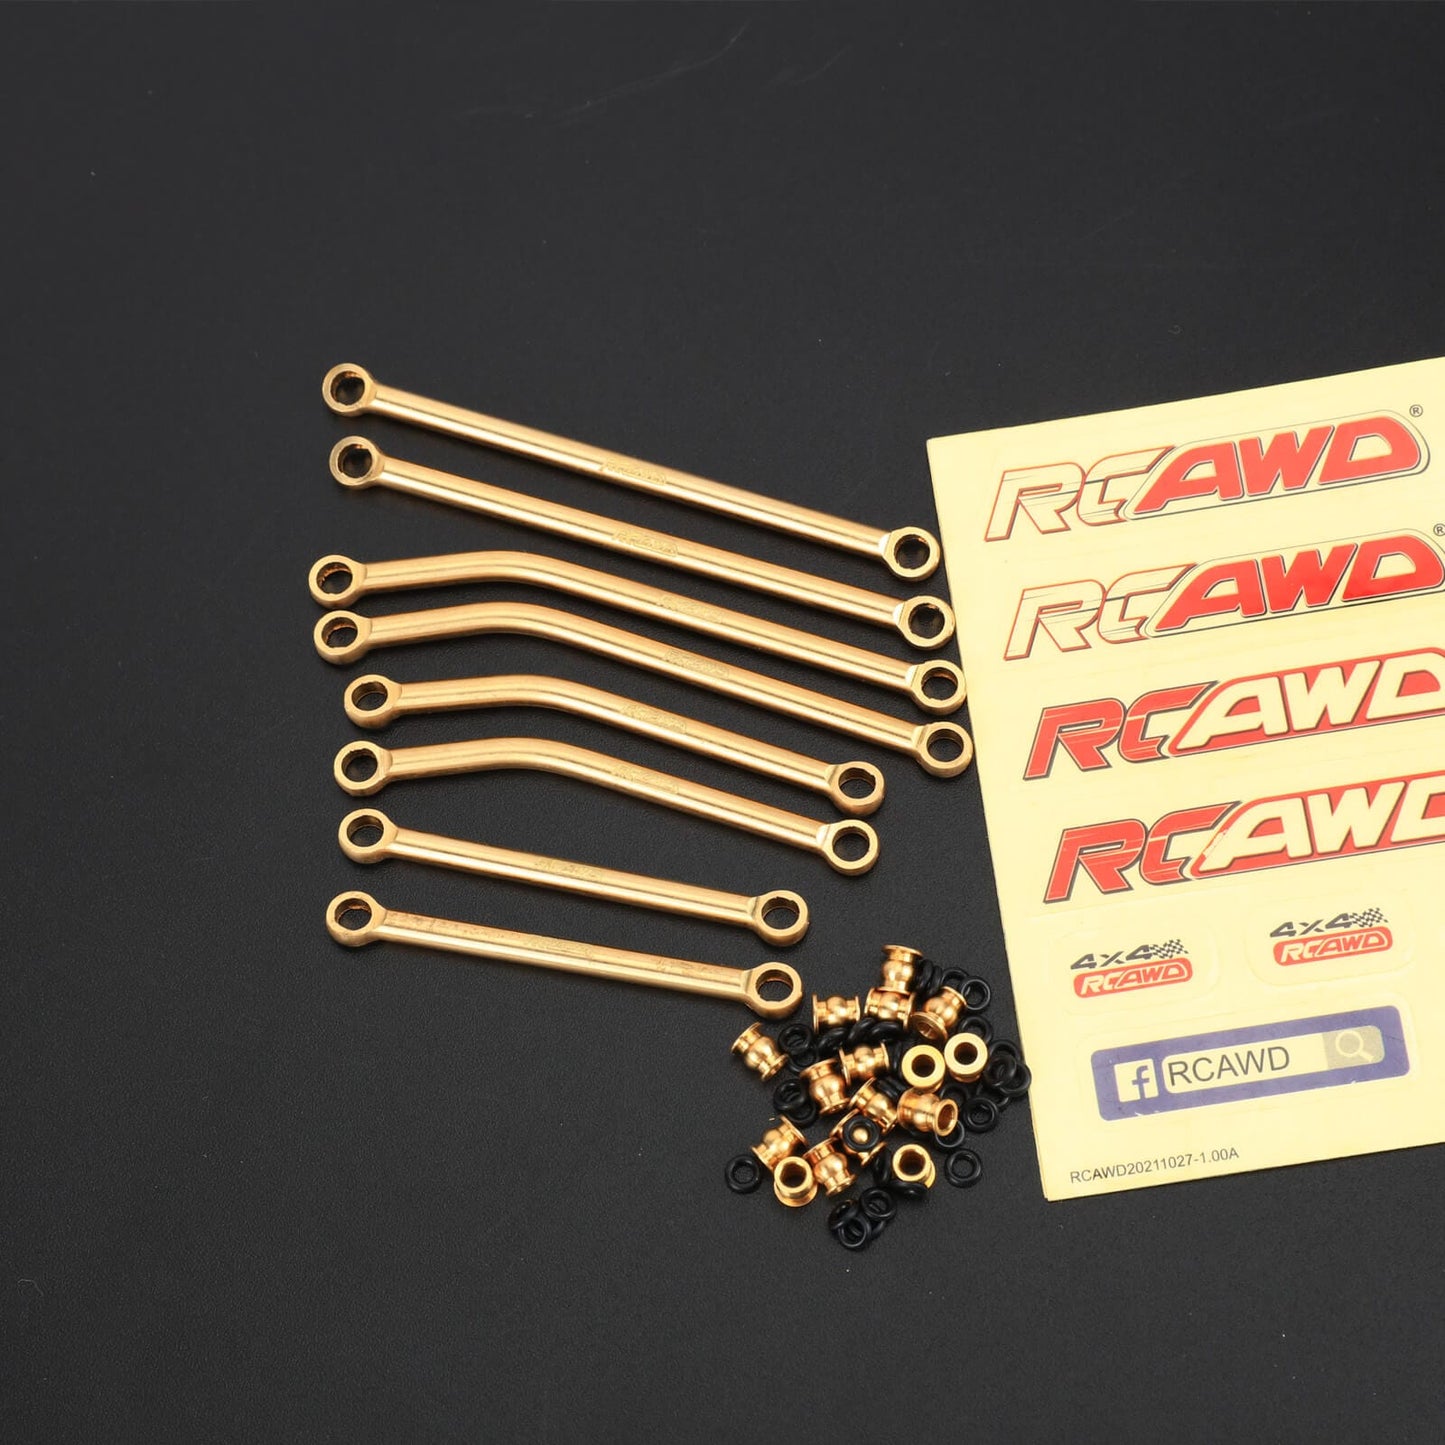 RCAWD Full High Clearance Upgraded Brass F/R Links Set for Trx4m Upgrades - RCAWD